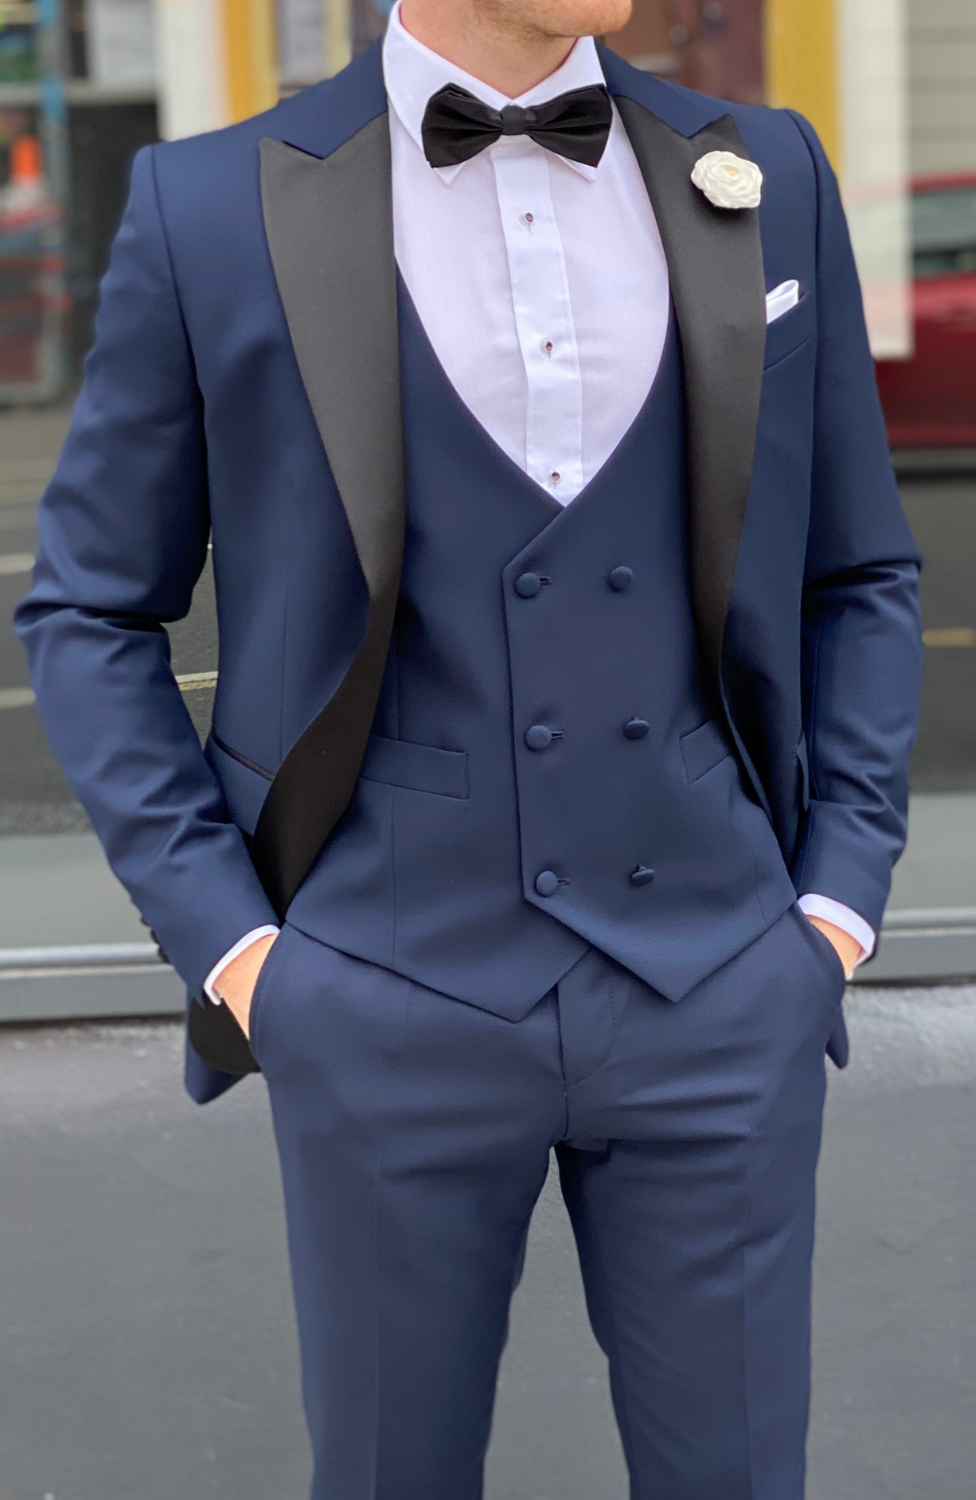 HIRE THE LOOK: INDIVIDUAL SUITS